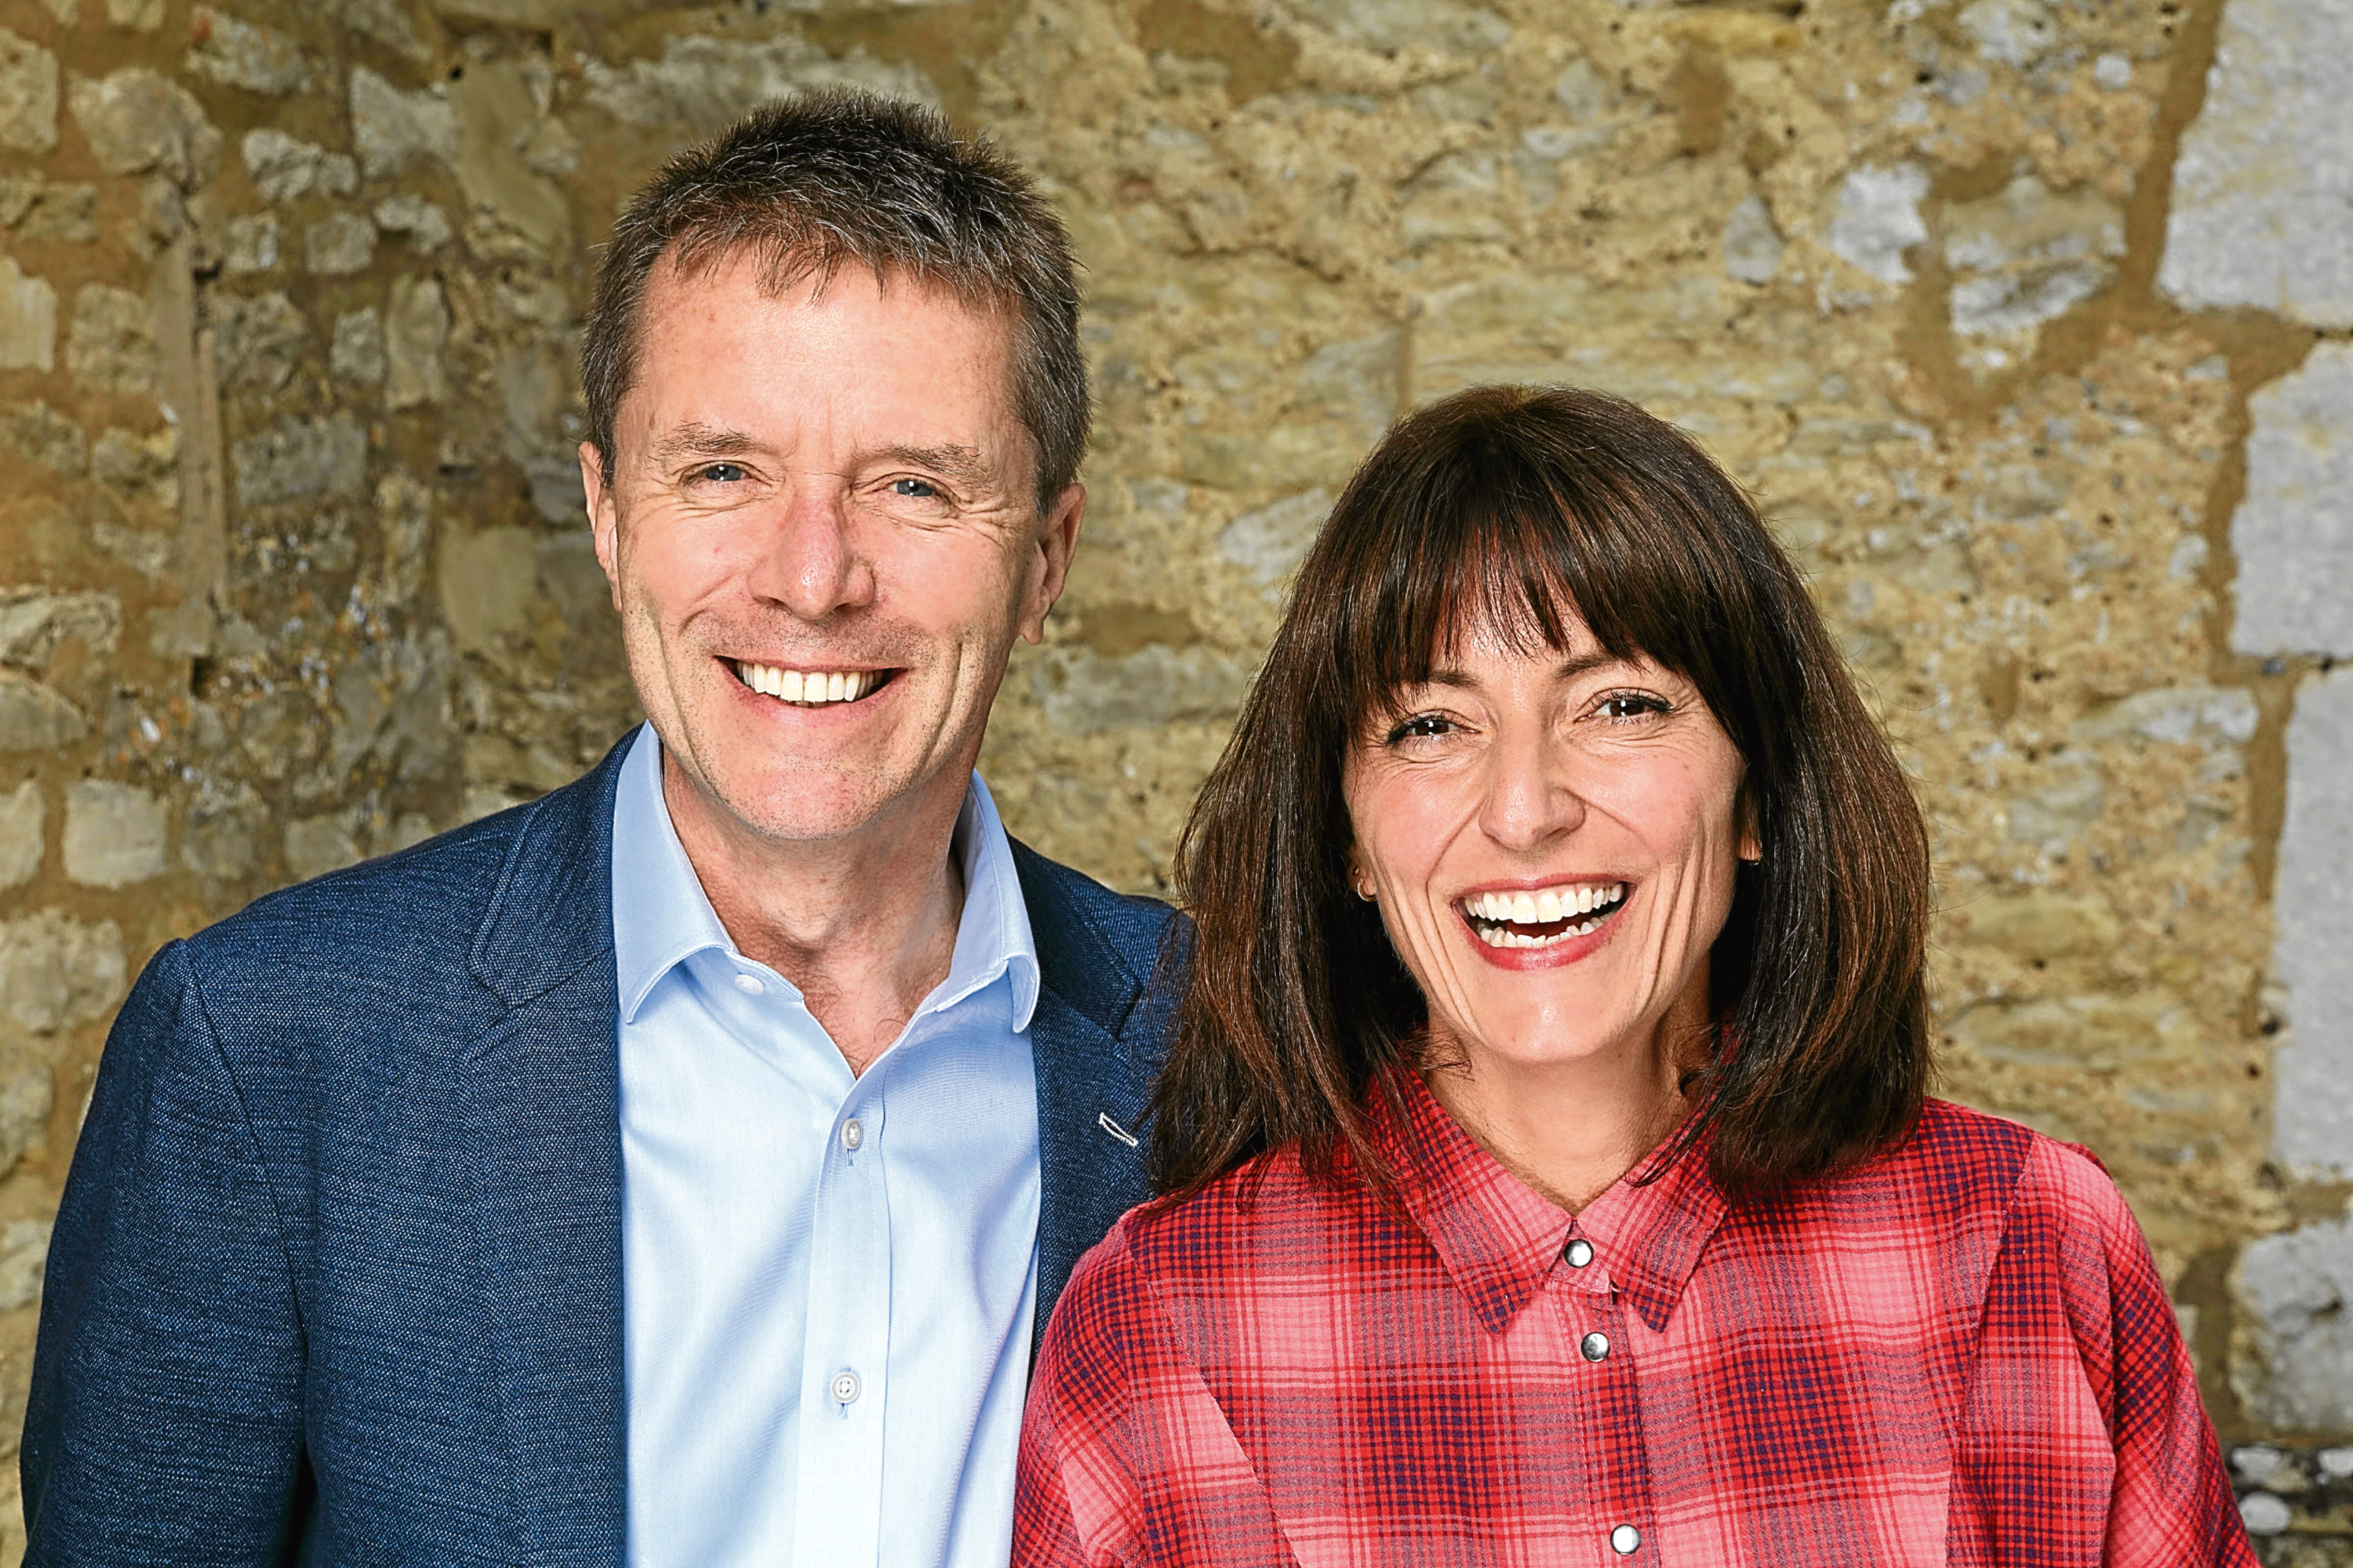 Nicky Campbell and Davina McCall (ITV, Wall to Wall Productions)